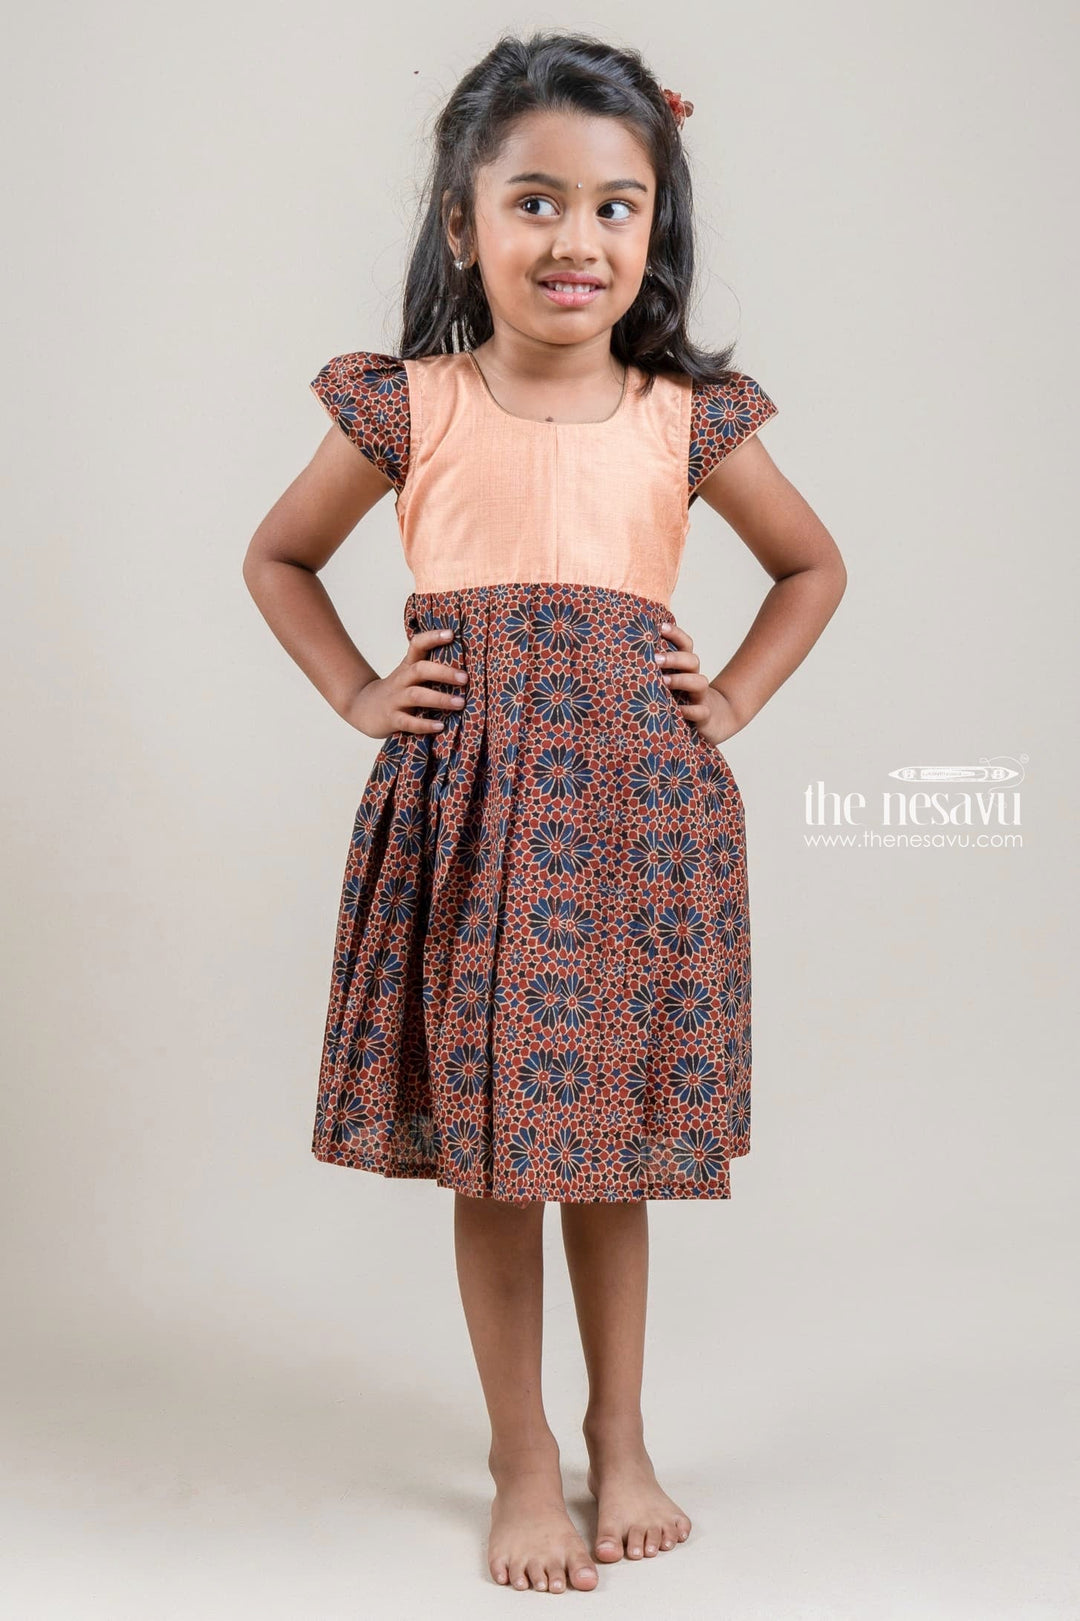 The Nesavu Girls Cotton Frock Simple Soft Cotton Printed Frock With Contrasting Yoke For Baby Girls Nesavu 12 (3M) / Brown / Cotton GFC859-12 Girls Play Wear Collection Online | Summer Cotton Frocks | The Nesavu